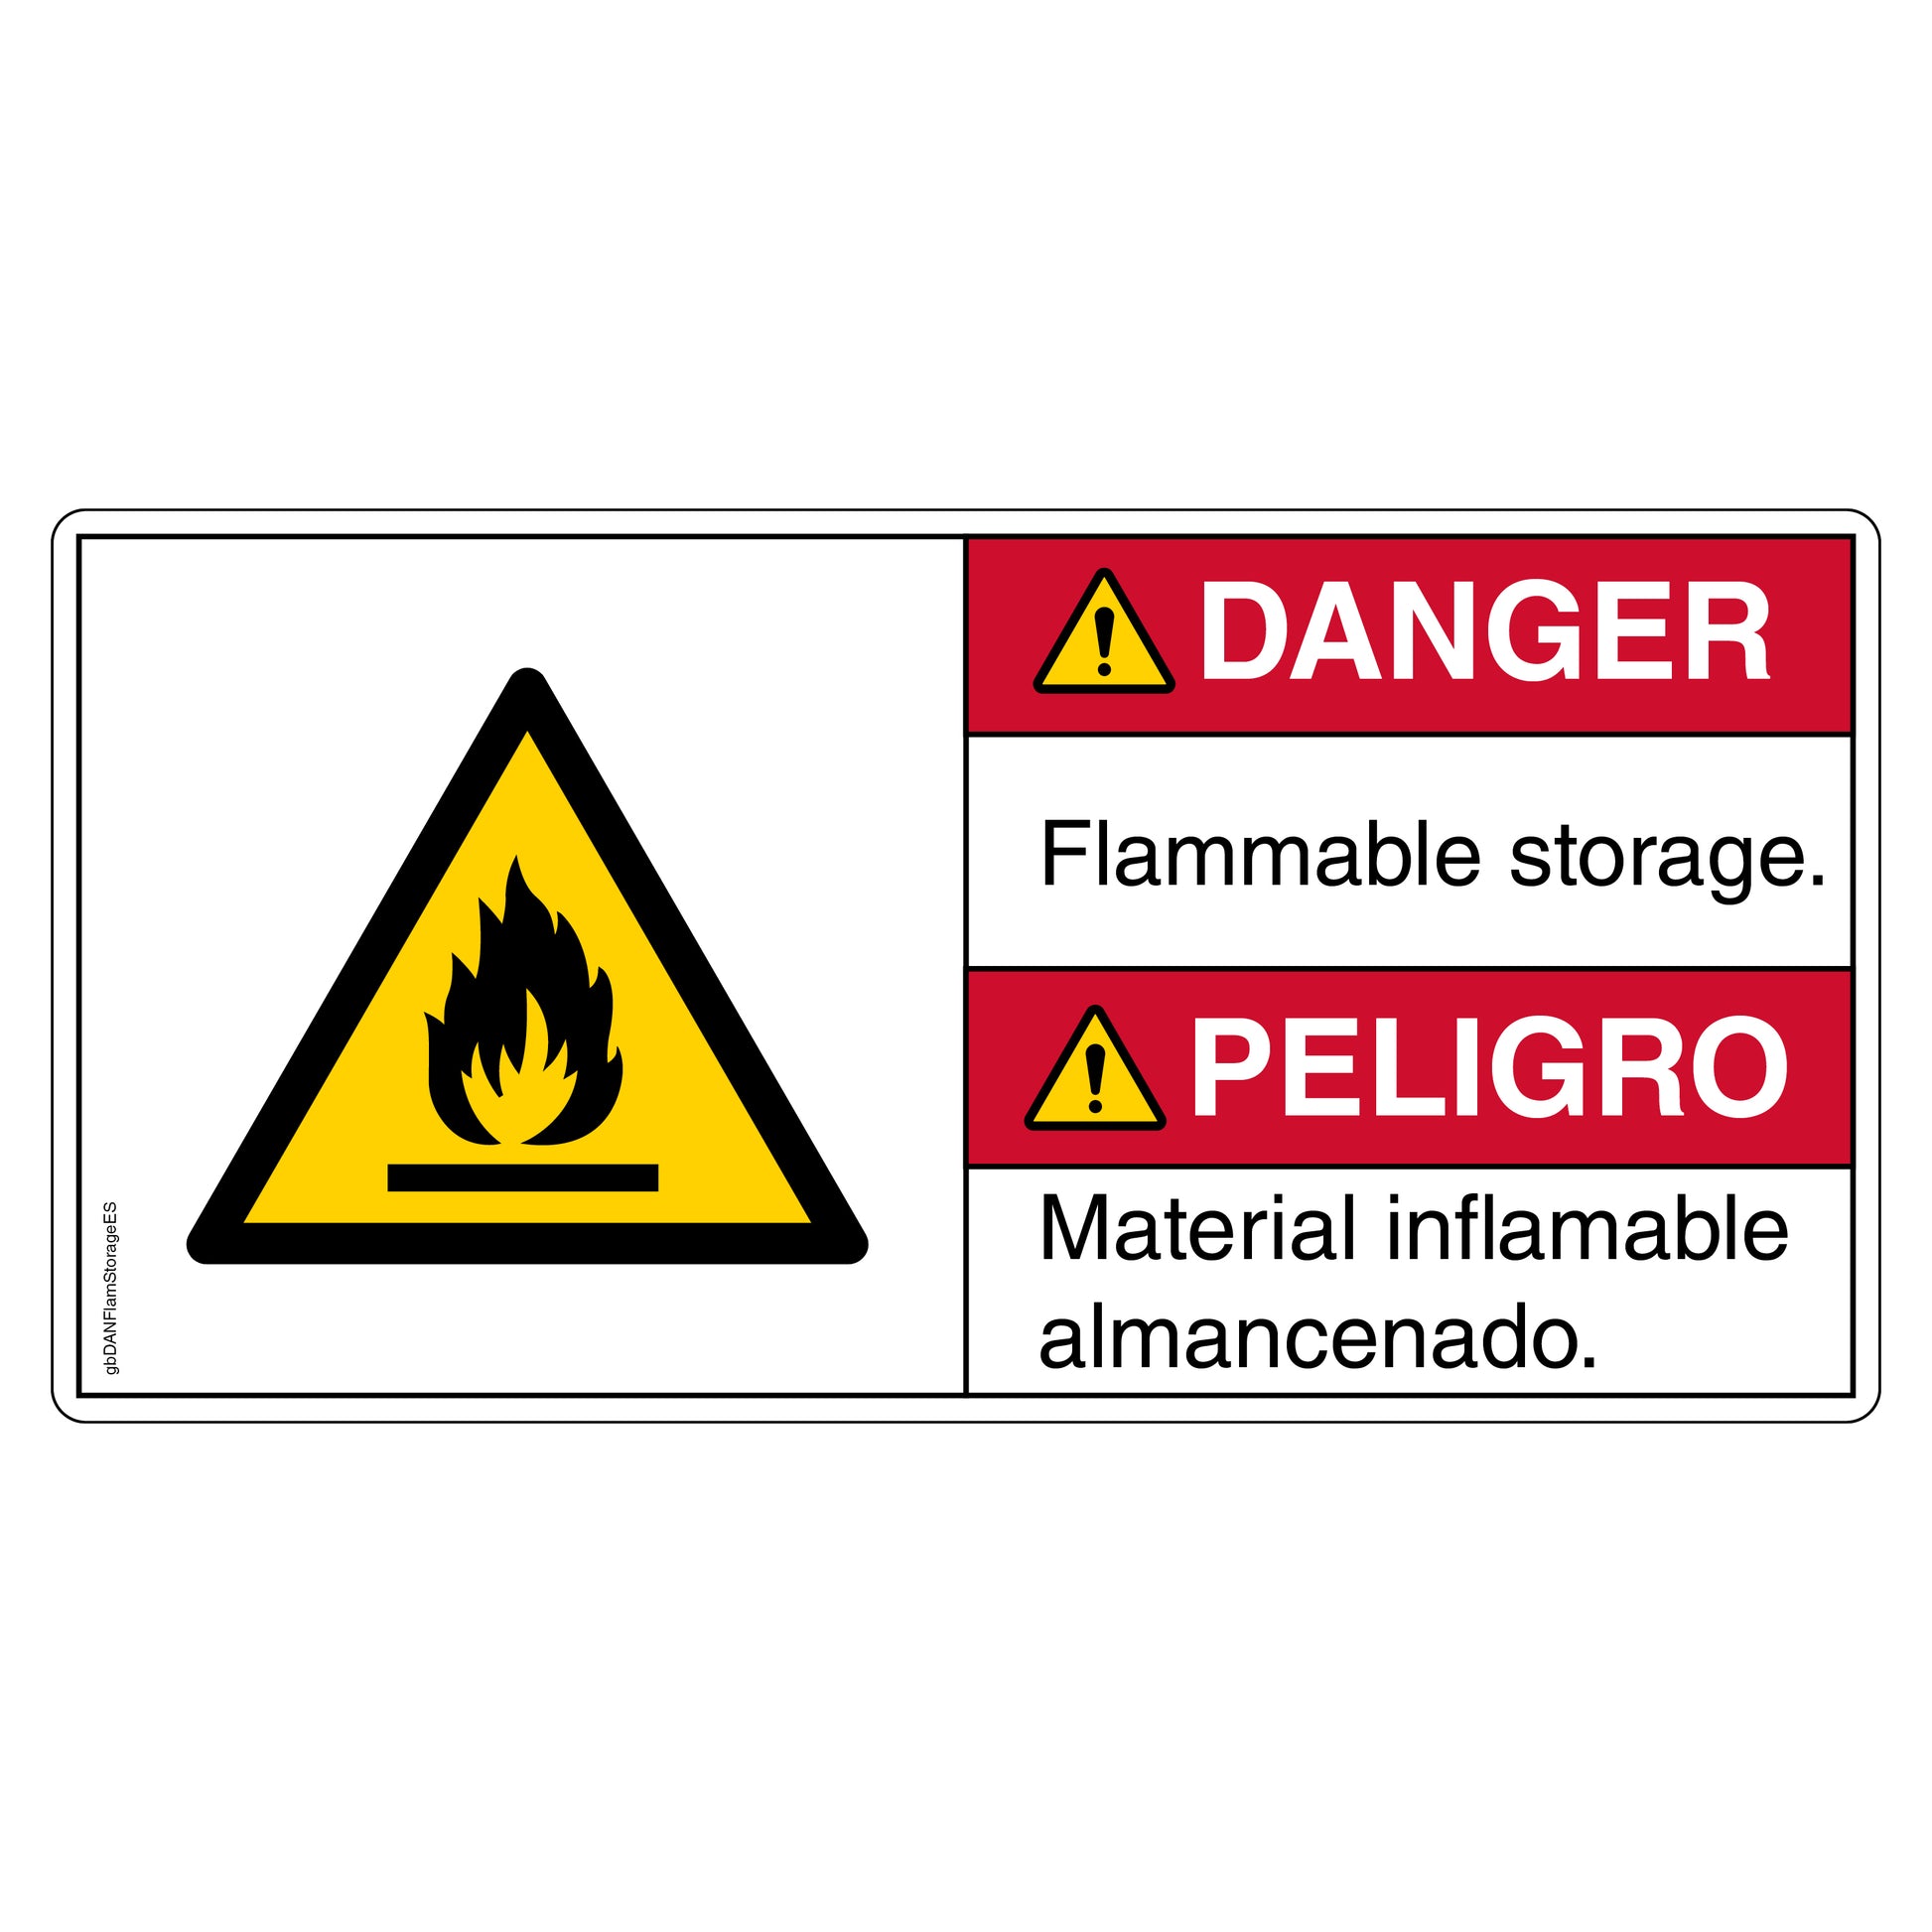 Danger Flammable Storage Decal in English and Spanish. 